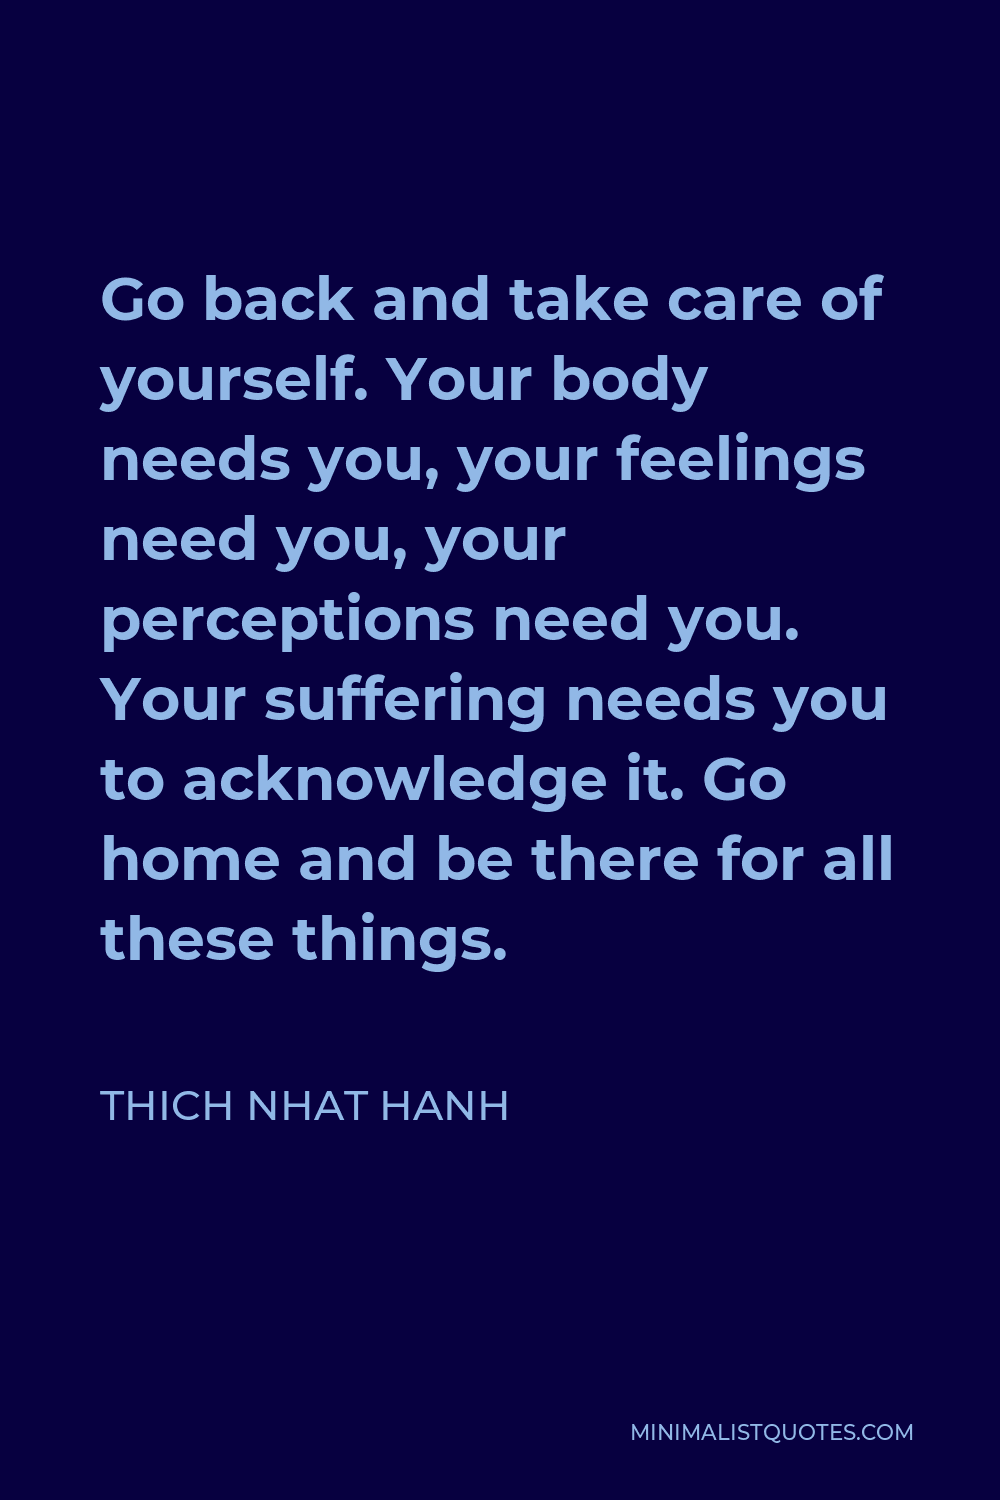 Thich Nhat Hanh Quote - Go back and take care of yourself. Your body needs you, your feelings need you, your perceptions need you. Your suffering needs you to acknowledge it. Go home and be there for all these things.